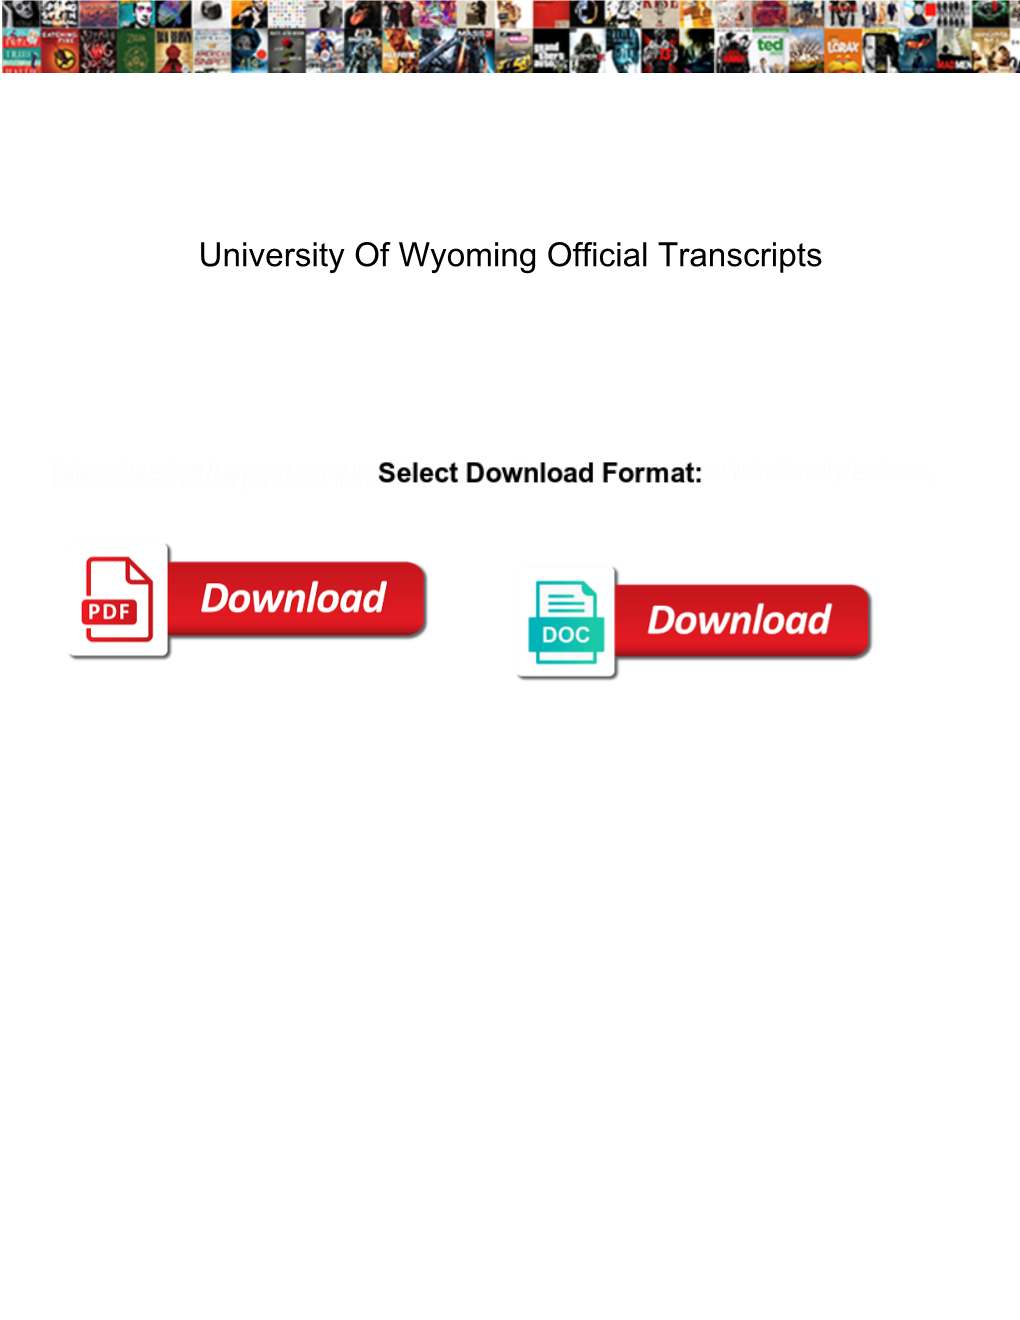 University of Wyoming Official Transcripts